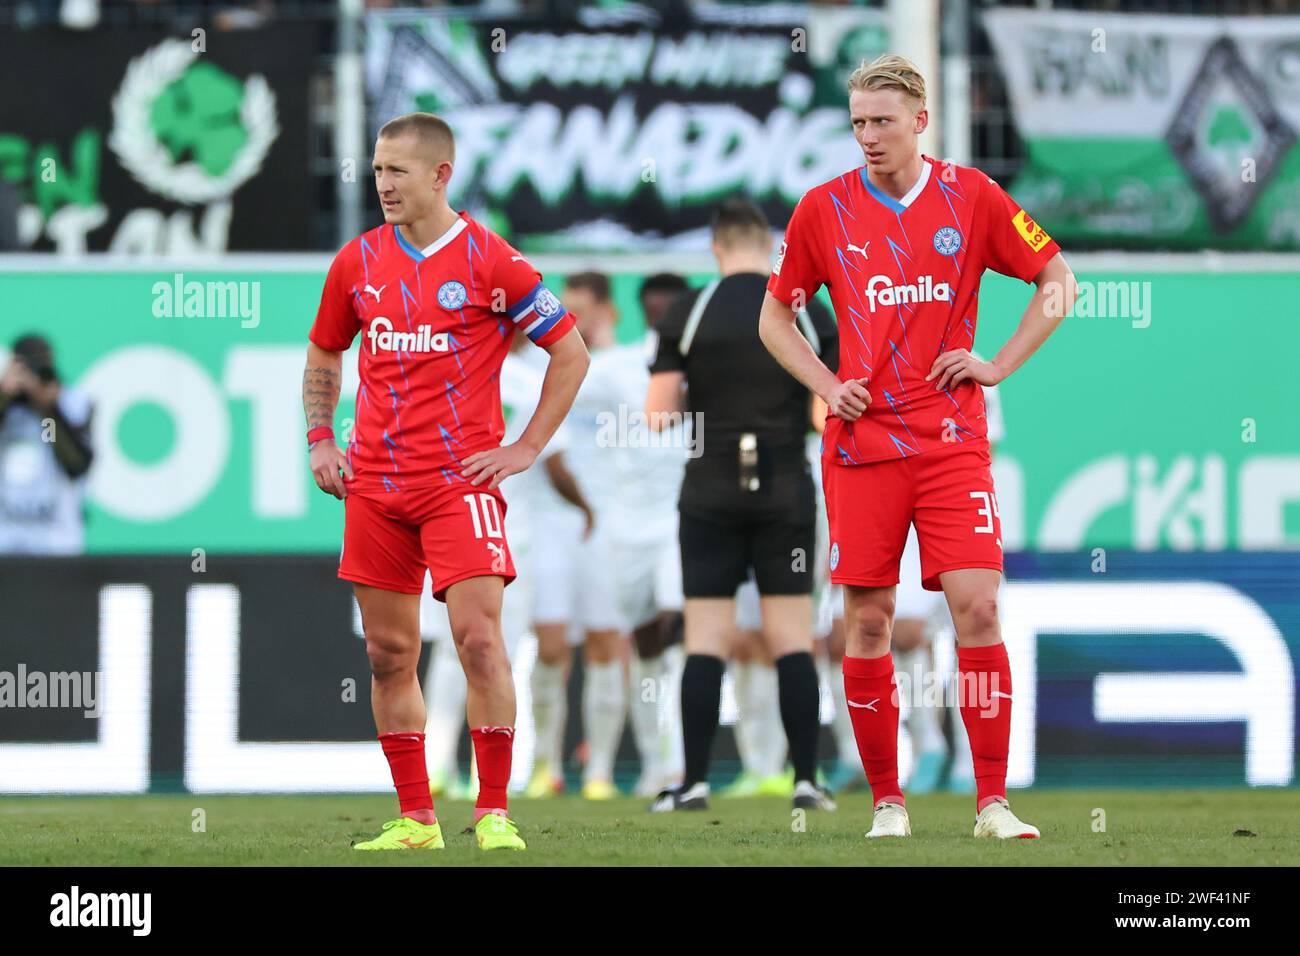 28 January 2024, Bavaria, Fürth: Soccer: Bundesliga 2, SpVgg Greuther Fürth - Holstein Kiel, matchday 19 at Sportpark Ronhof Thomas Sommer. Lewis Holtby (l) and Colin Kleine-Bekel of Holstein Kiel stand on the pitch after Fürth's 2:1 goal. Photo: Daniel Karmann/dpa - IMPORTANT NOTE: In accordance with the regulations of the DFL German Football League and the DFB German Football Association, it is prohibited to utilize or have utilized photographs taken in the stadium and/or of the match in the form of sequential images and/or video-like photo series. Stock Photo